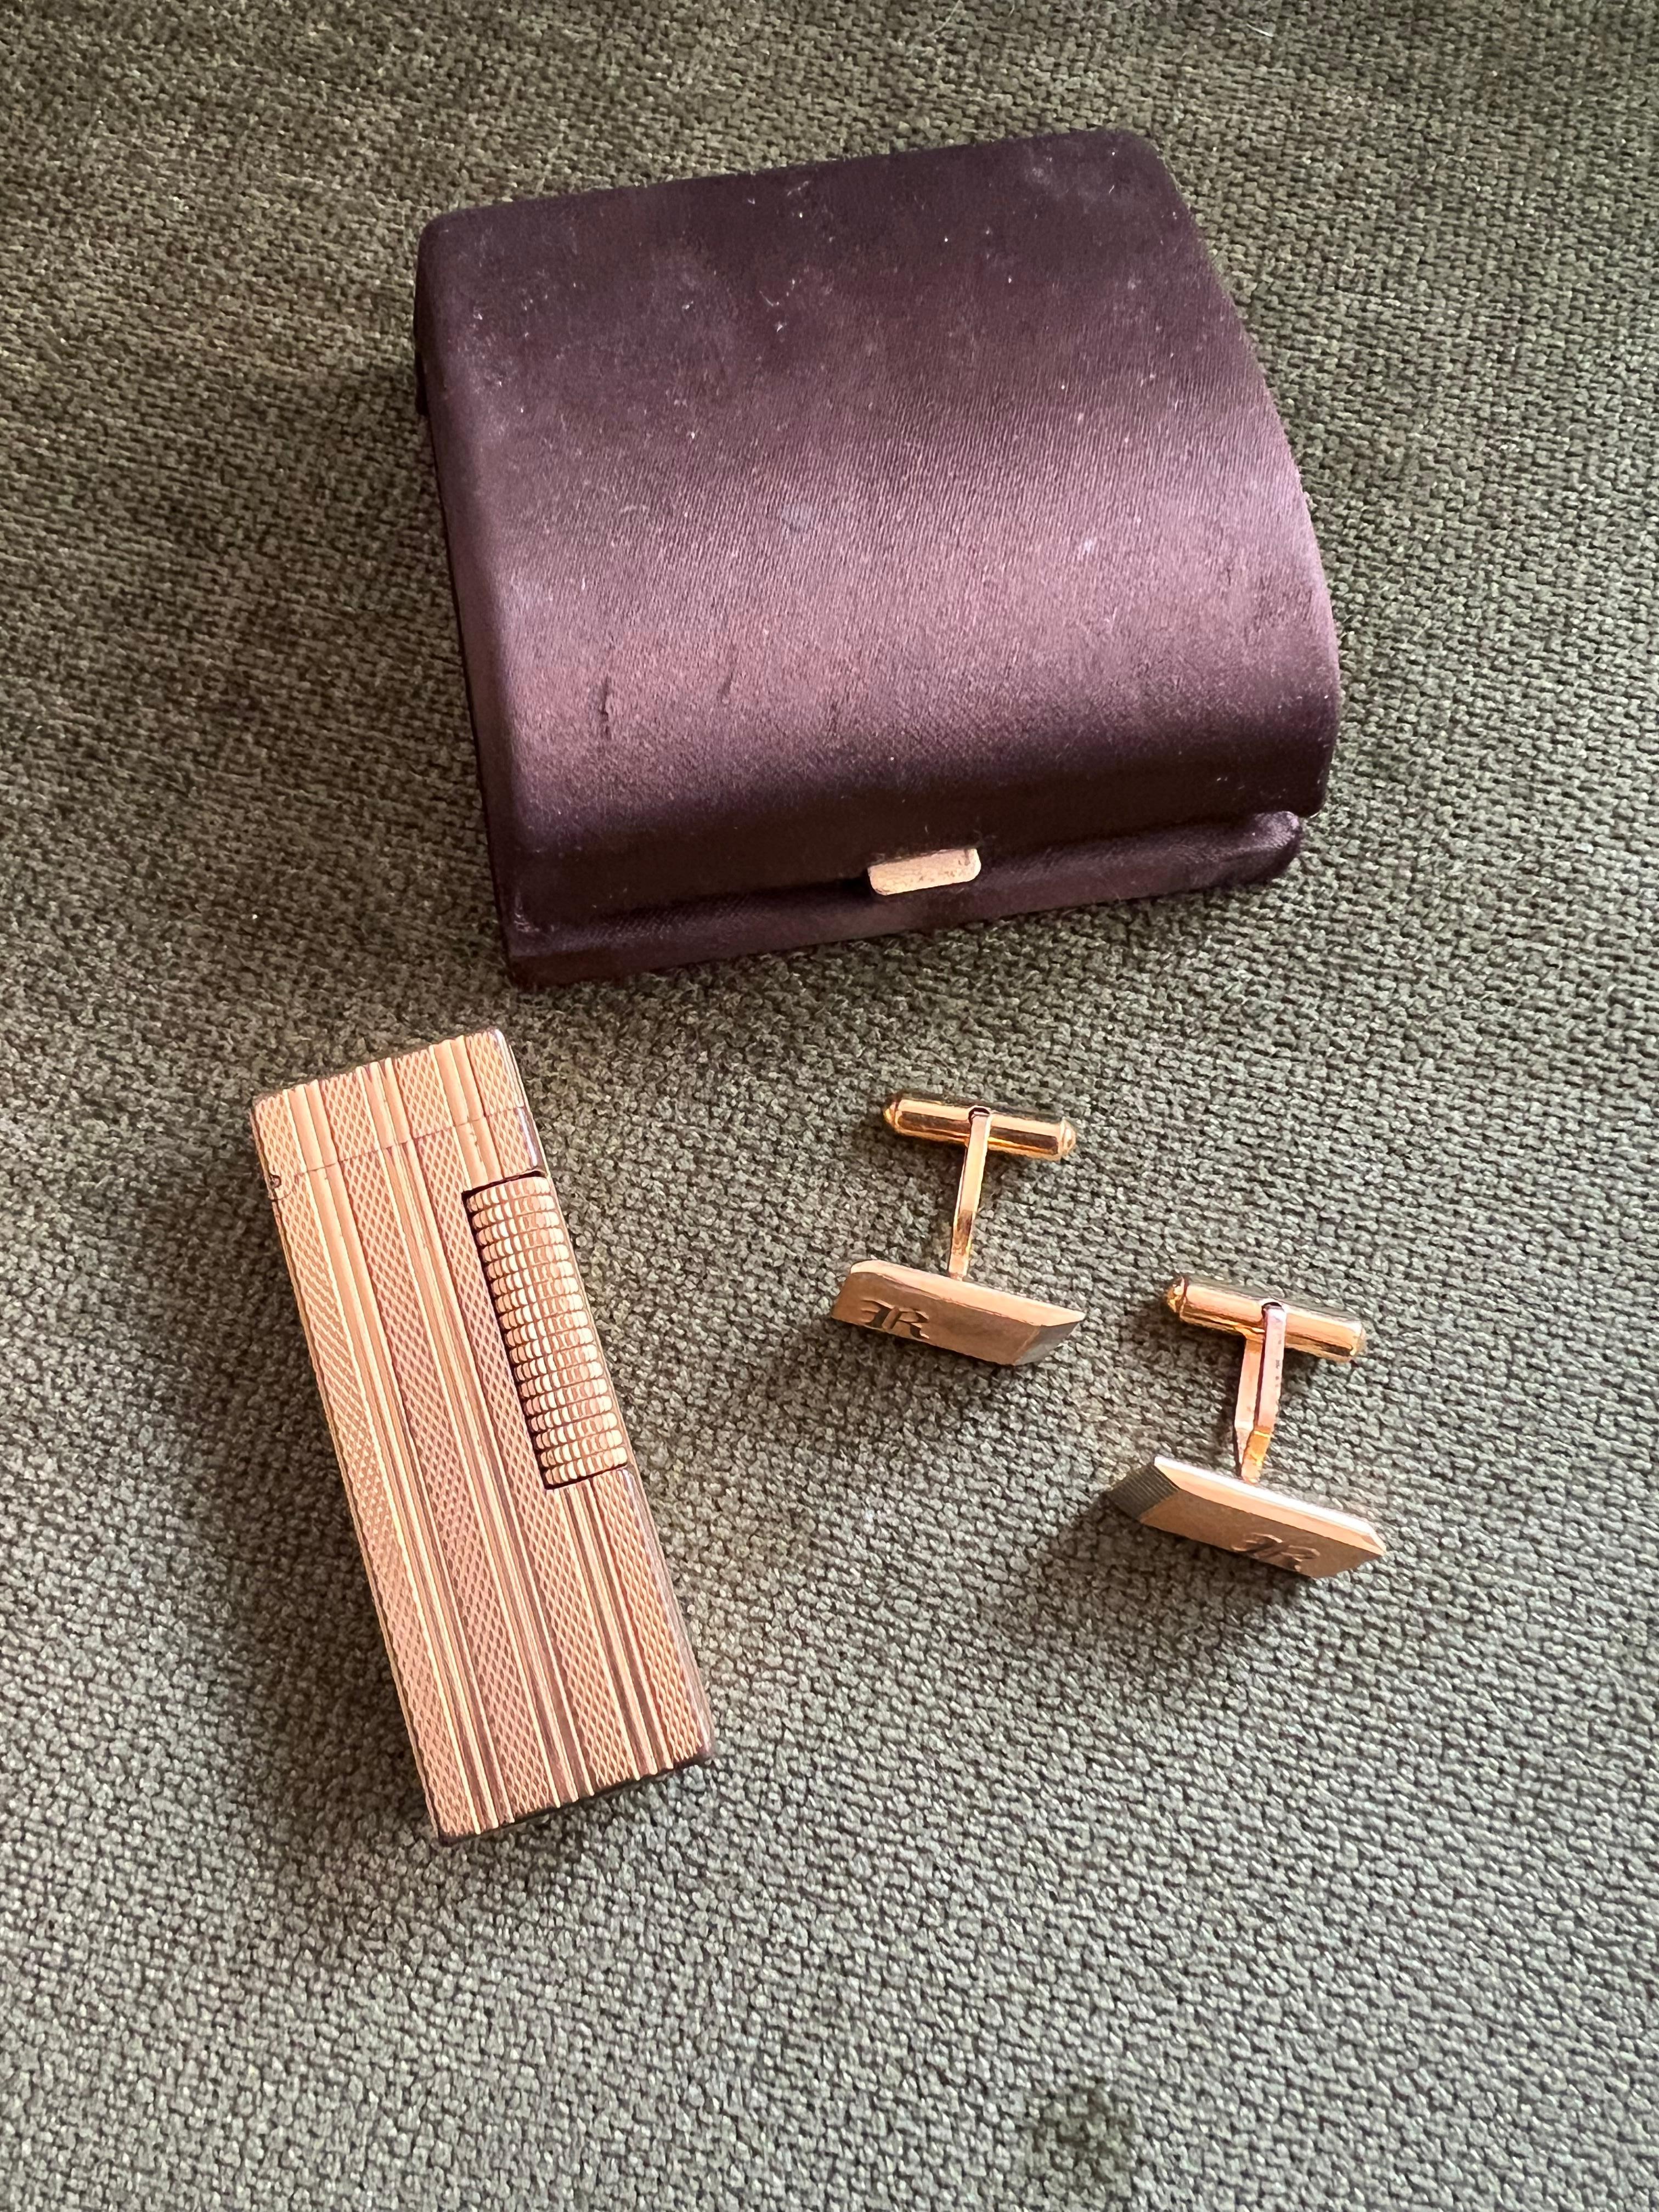 Vintage “Dunhill” Gold Plated Lighter and “Murat” Cufflinks 4